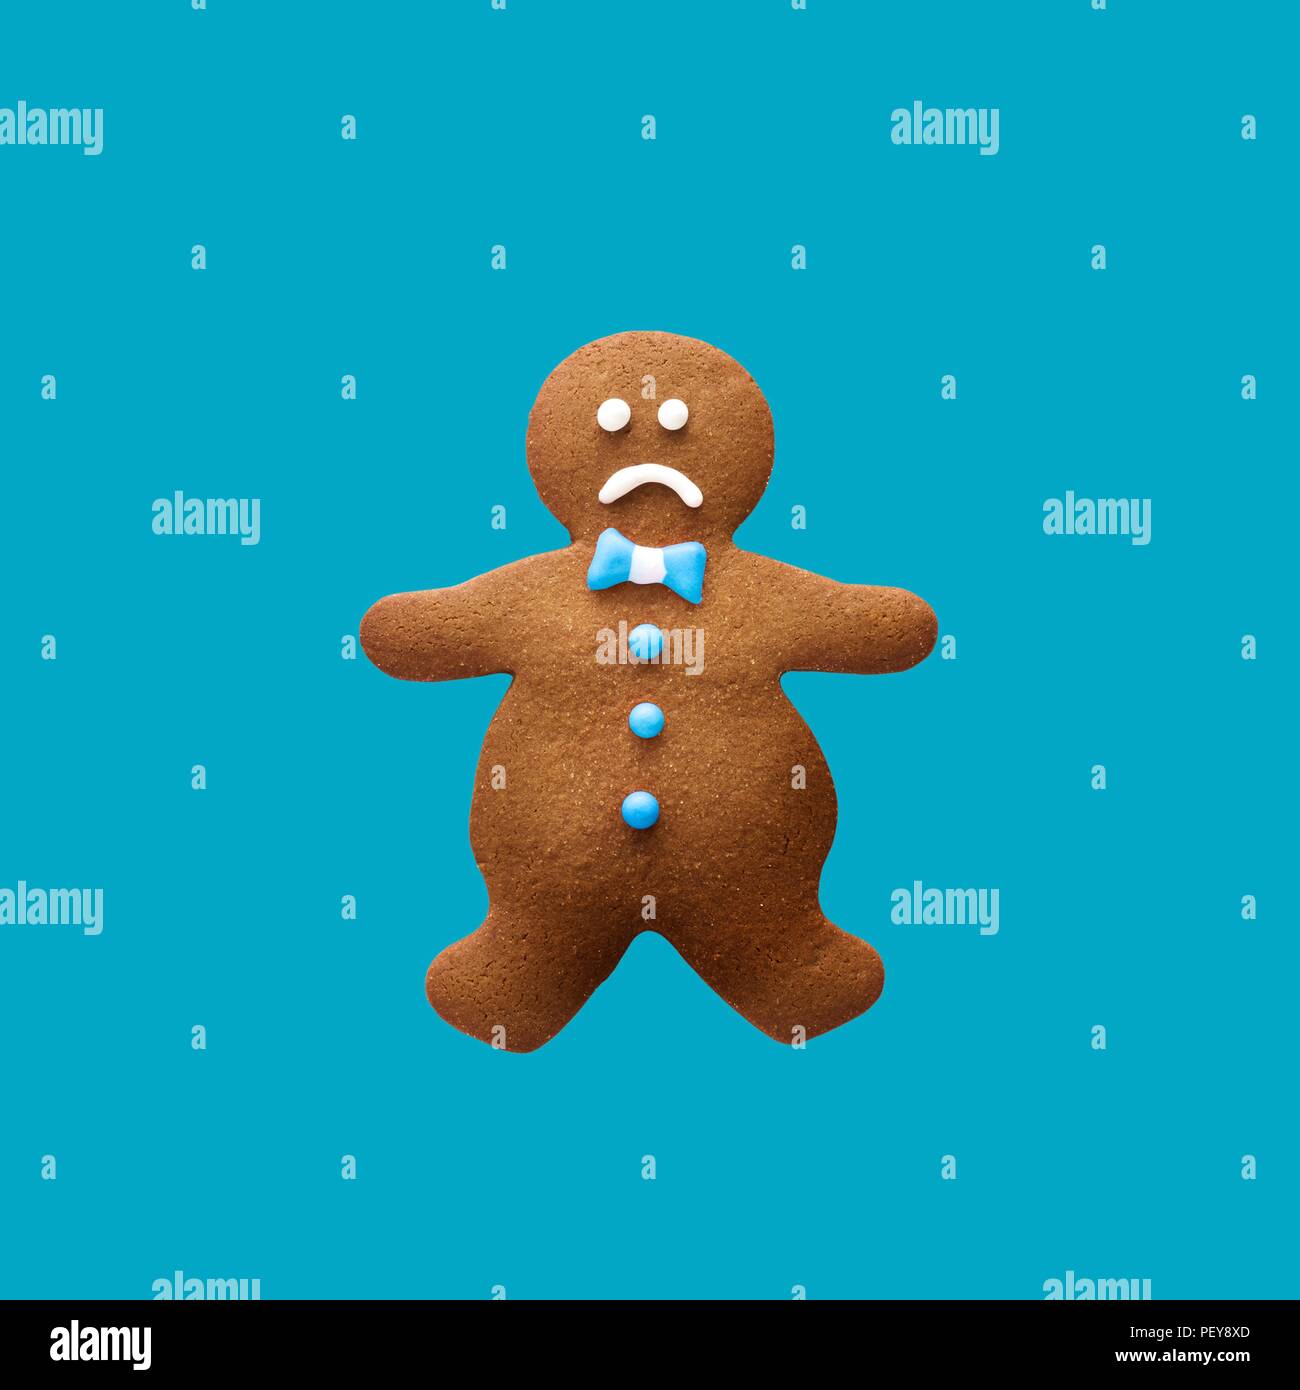 Obese gingerbread man. Stock Photo